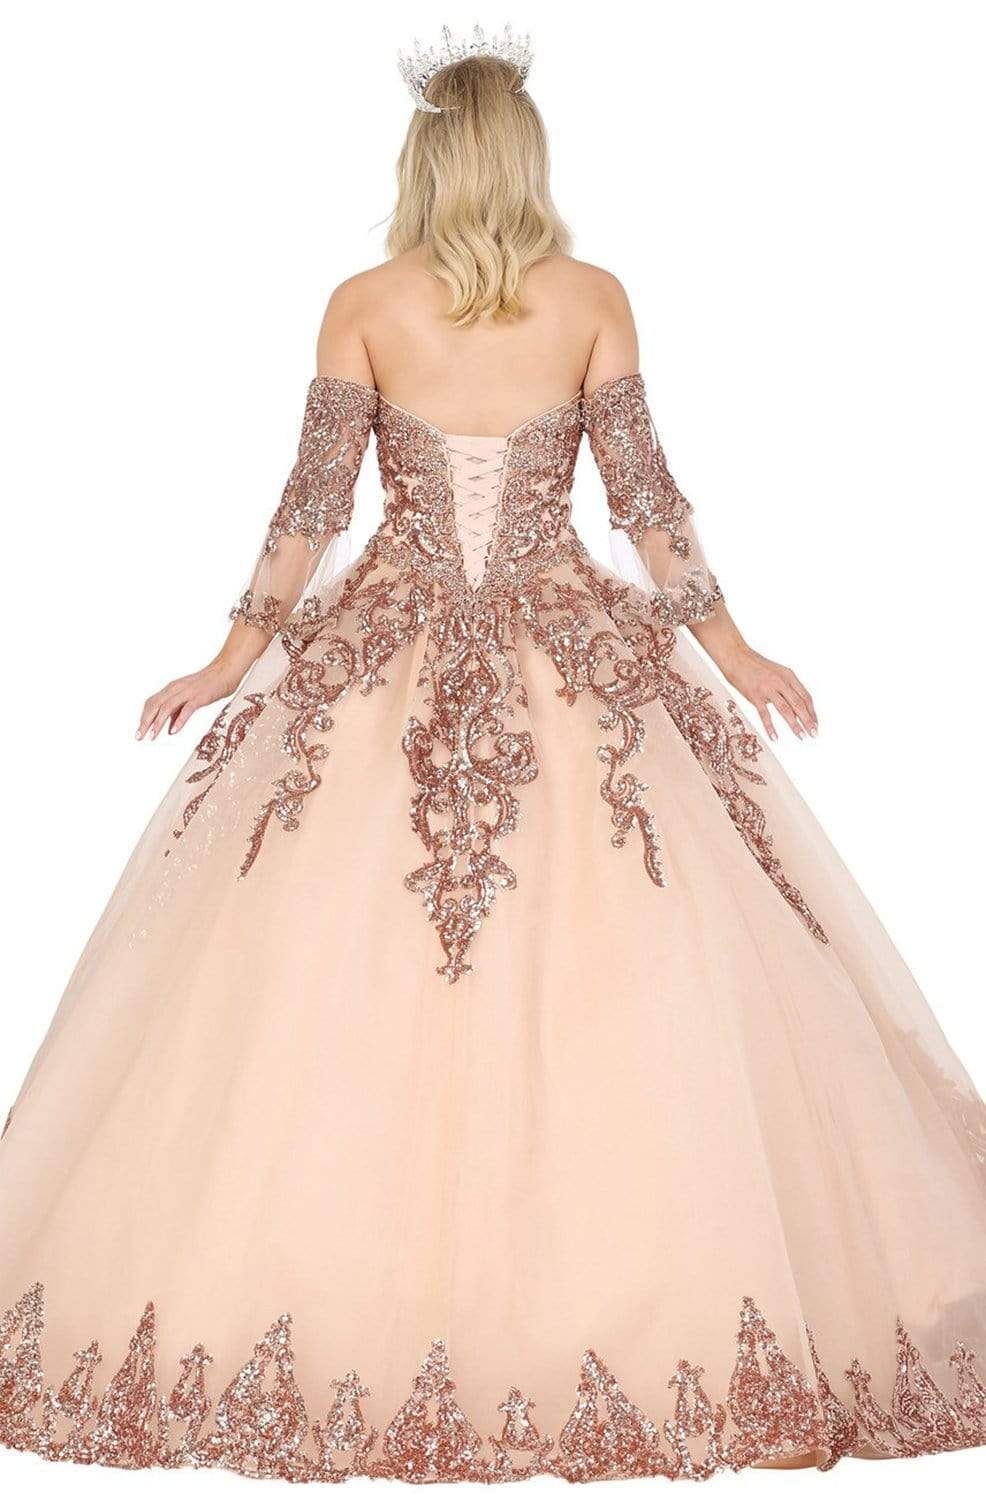 Dancing Queen - 1512 Embellished Strapless Sweetheart Ballgown Quinceanera Dresses